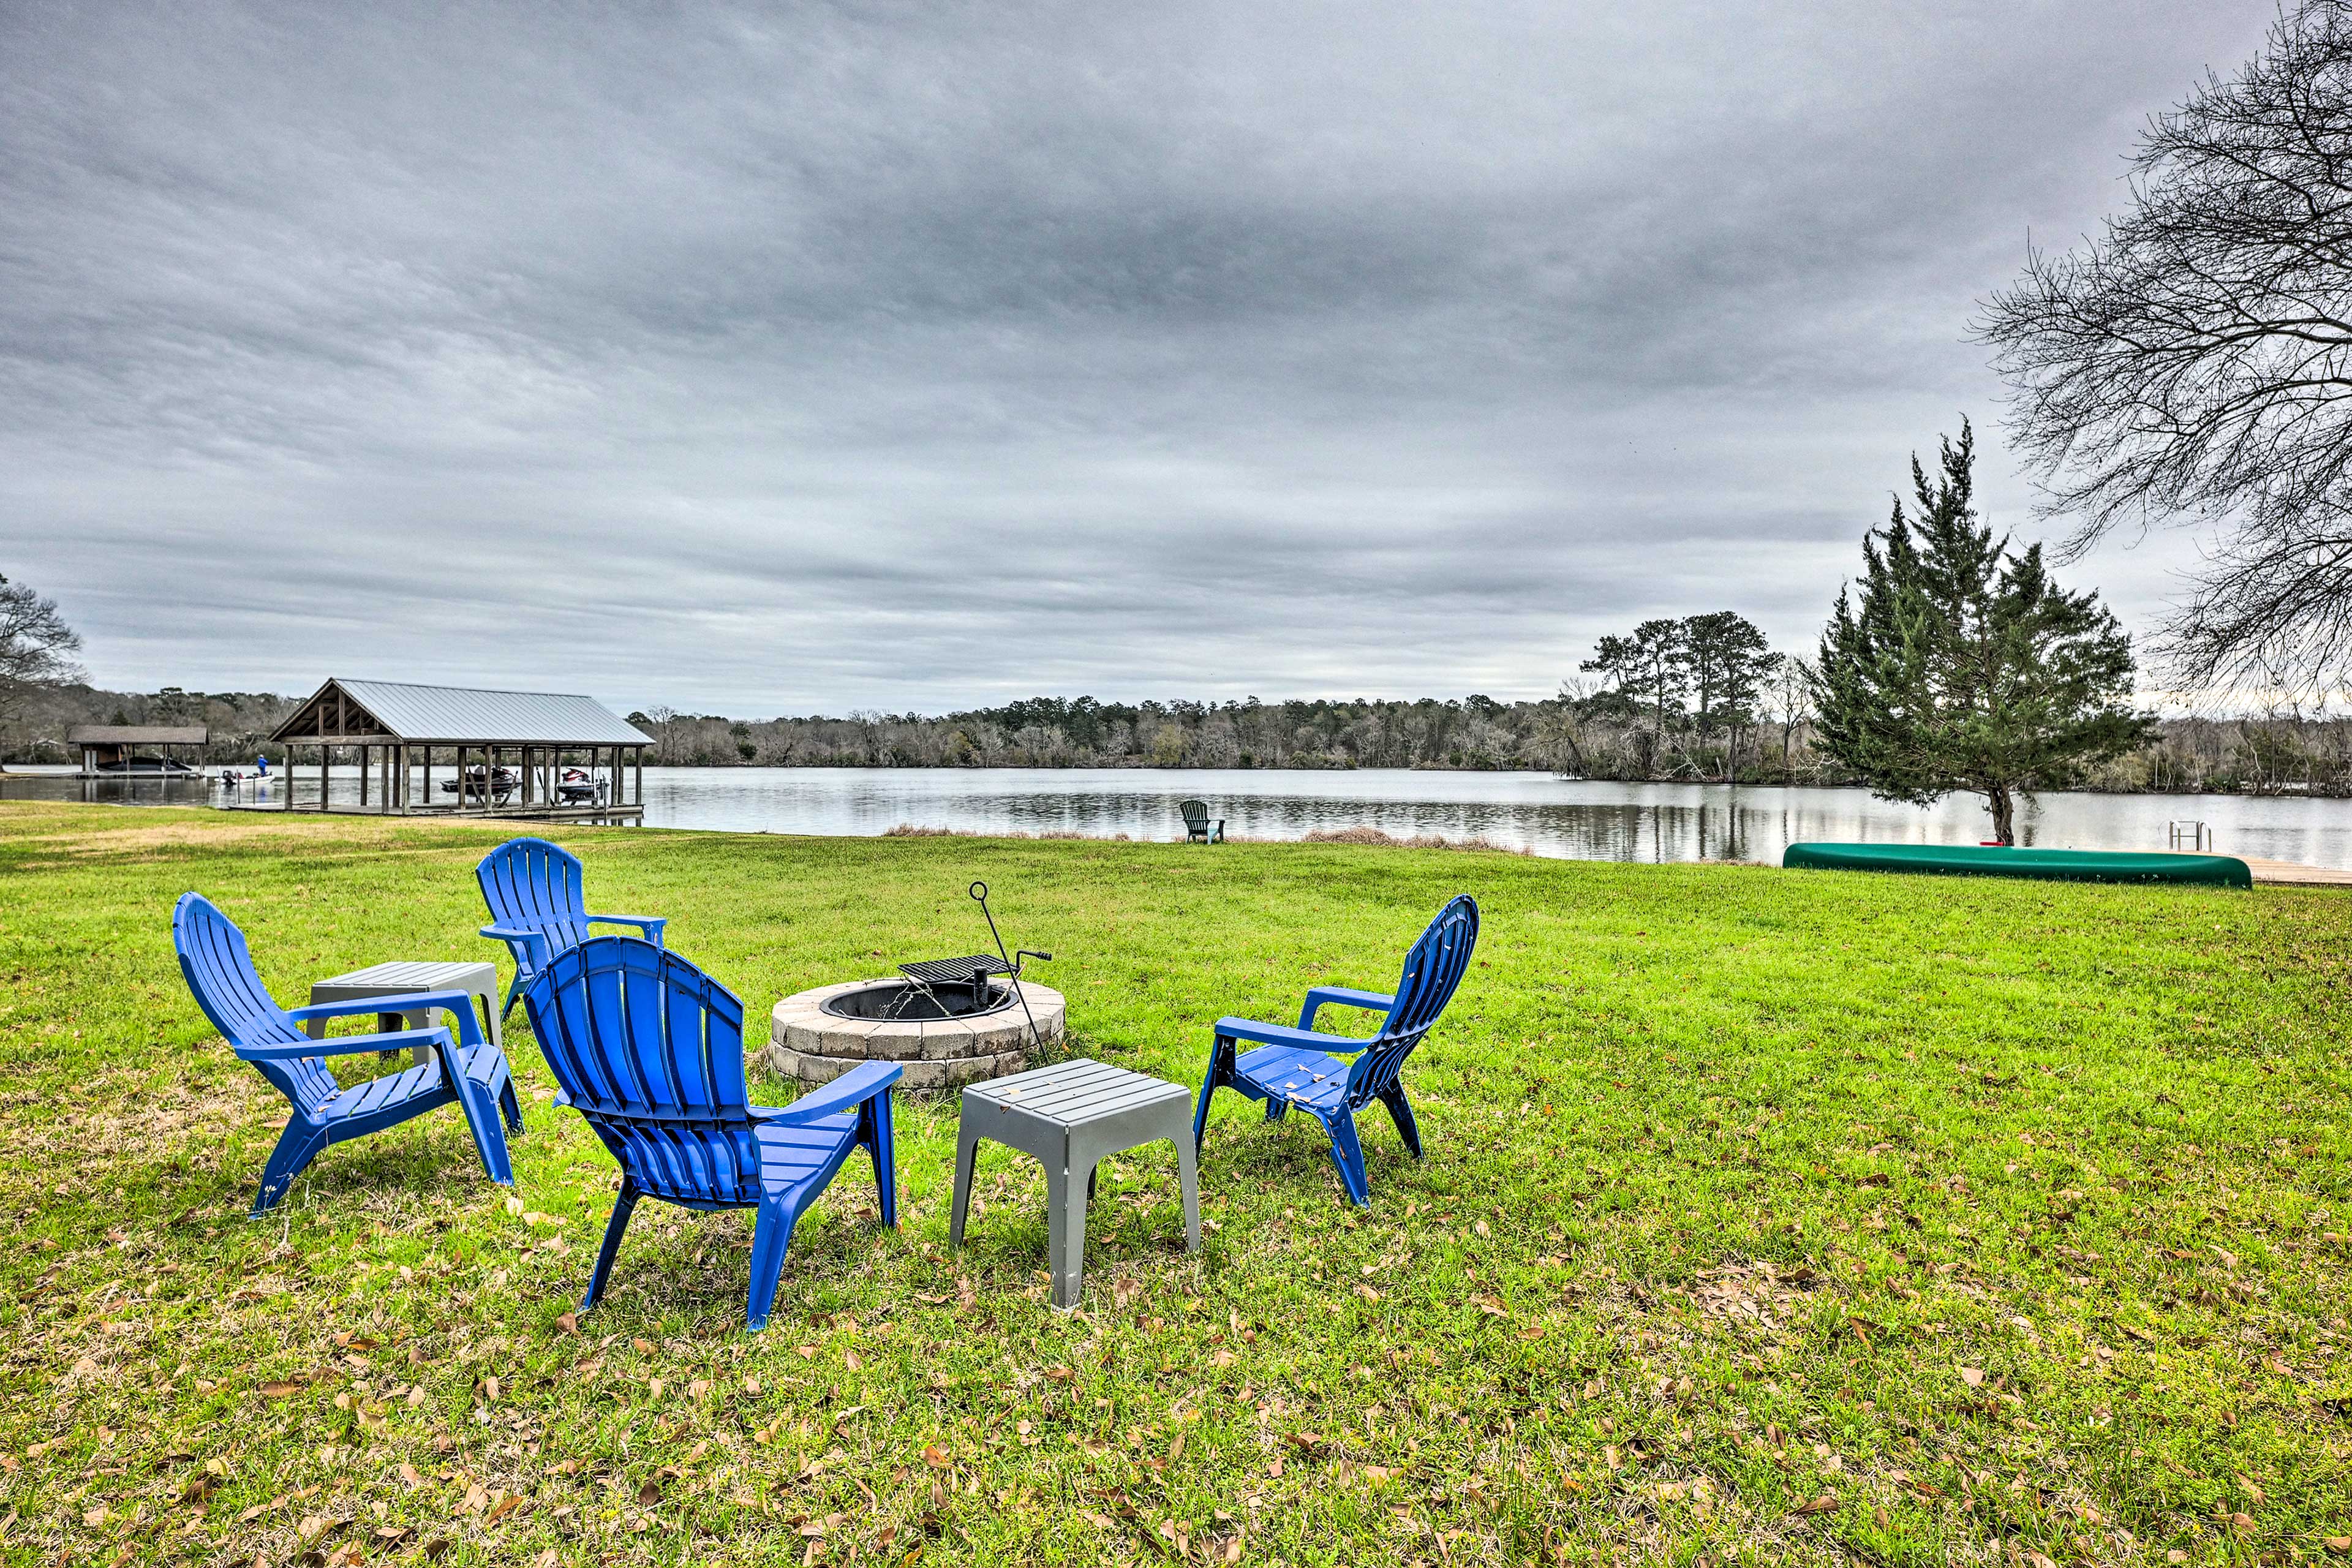 Willis Vacation Rental | 3BR | 2.5BA | 2,500 Sq Ft | 1 Small Step to Enter